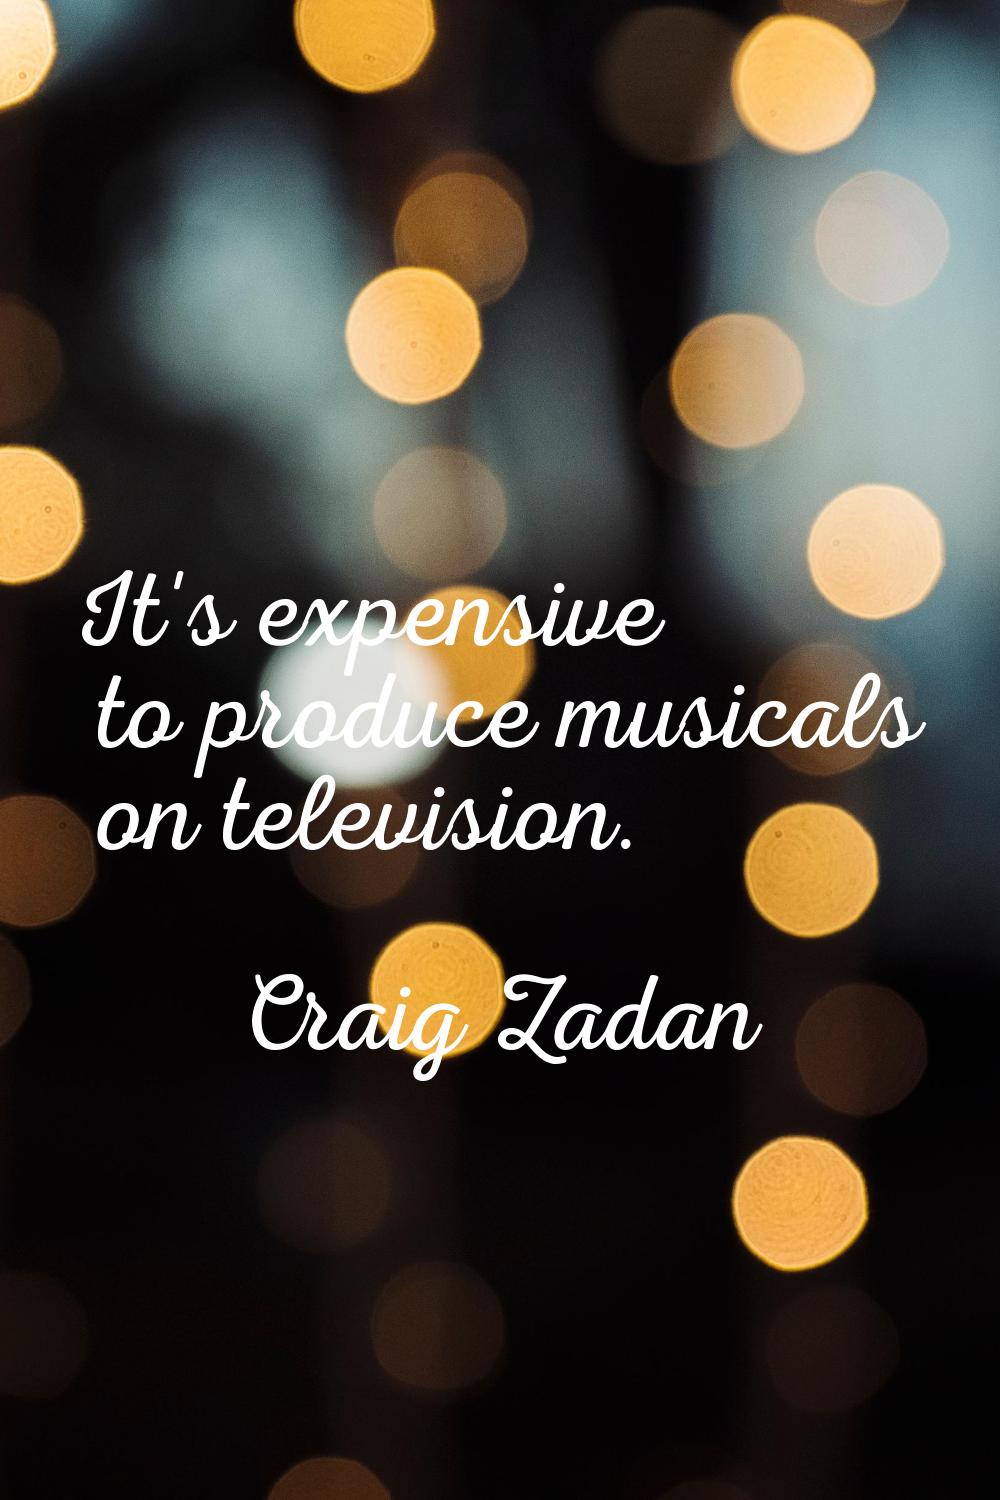 It's expensive to produce musicals on television.